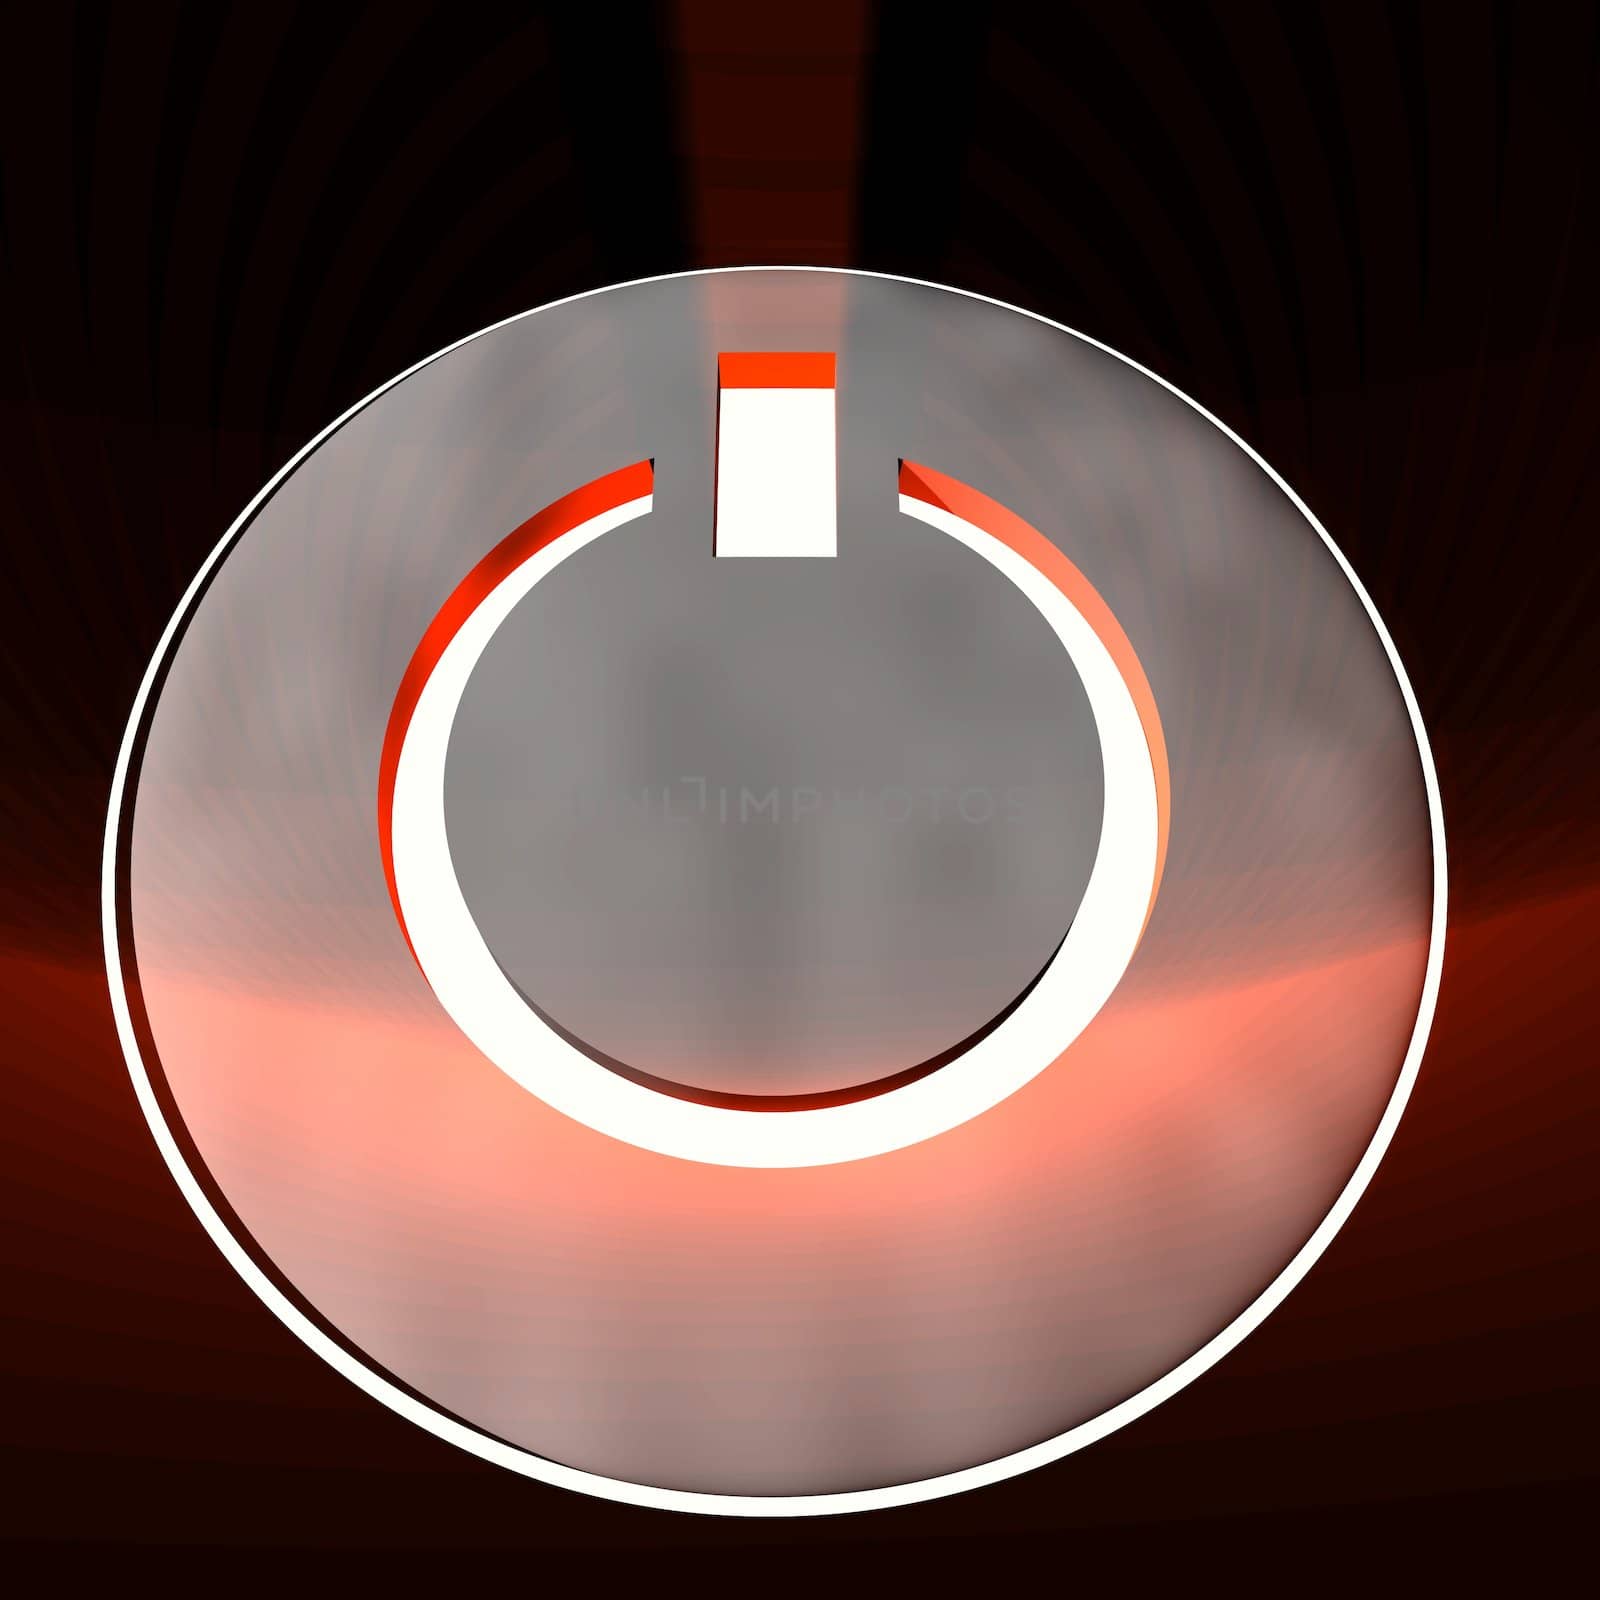 An electronic devices power button glowing red.